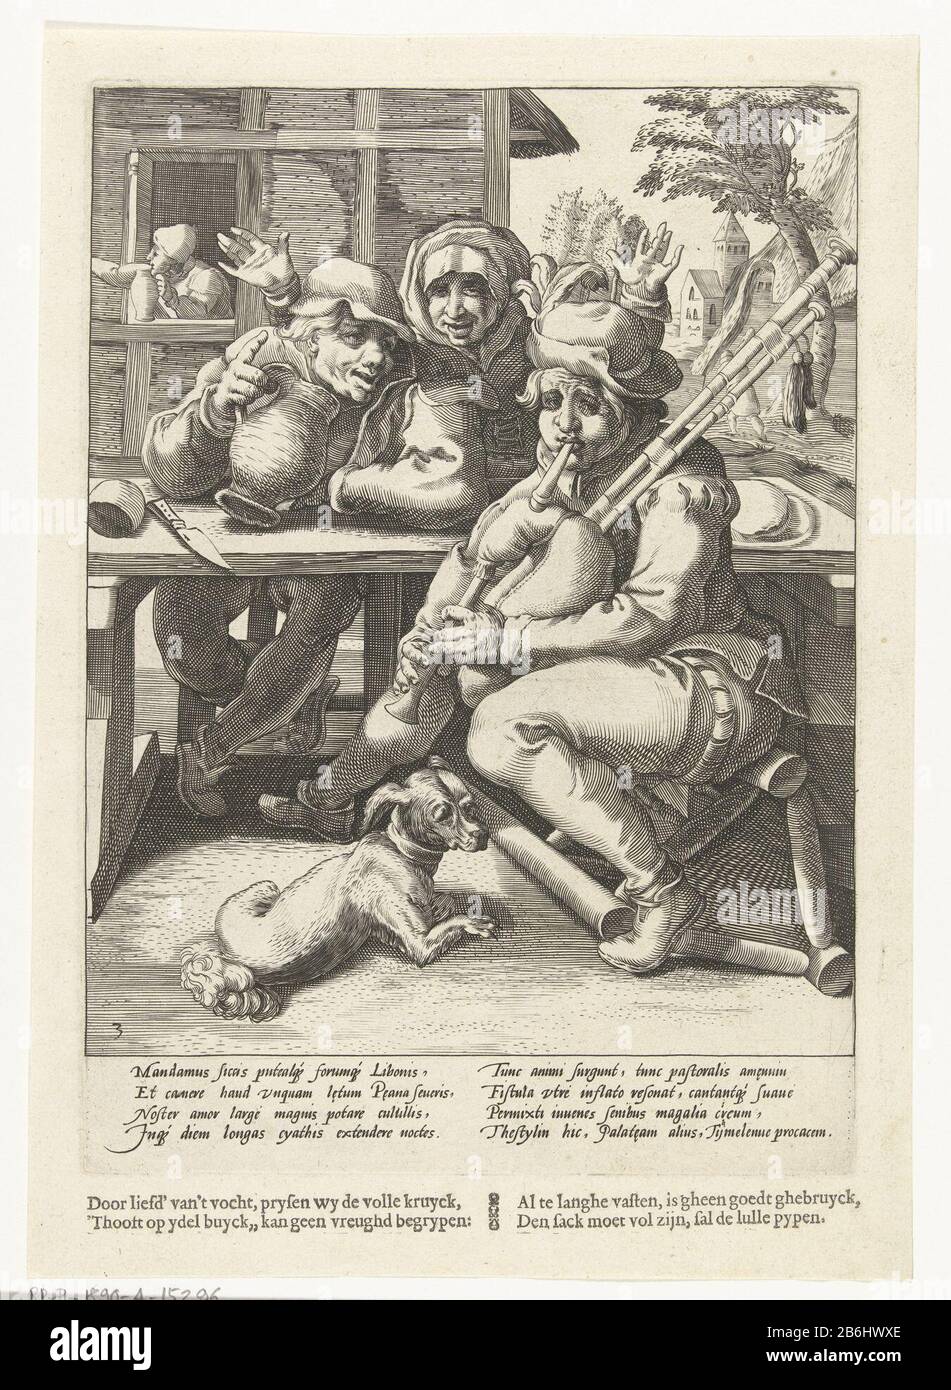 The bagpipe no sound, then he is full of the drinker and the piper Proverbs Karel van Mander (series title) a piper and a drunkard sit together. Behind the table, a woman raised her hands. The piper sitting on a fallen chair, sitting beside him a dog. Among the show an explanatory Latin verse Franco Estius and Dutch vers. Manufacturer : printmaker: Hendrick Goltzius (attributed to studio), designed by Karel van Mander (I) author: Franco EstiusPlaats manufacture Haarlem Dating: 1590 - 1594 Physical features: engra and text printing material: paper Technique: engra (printing process) / printing Stock Photo